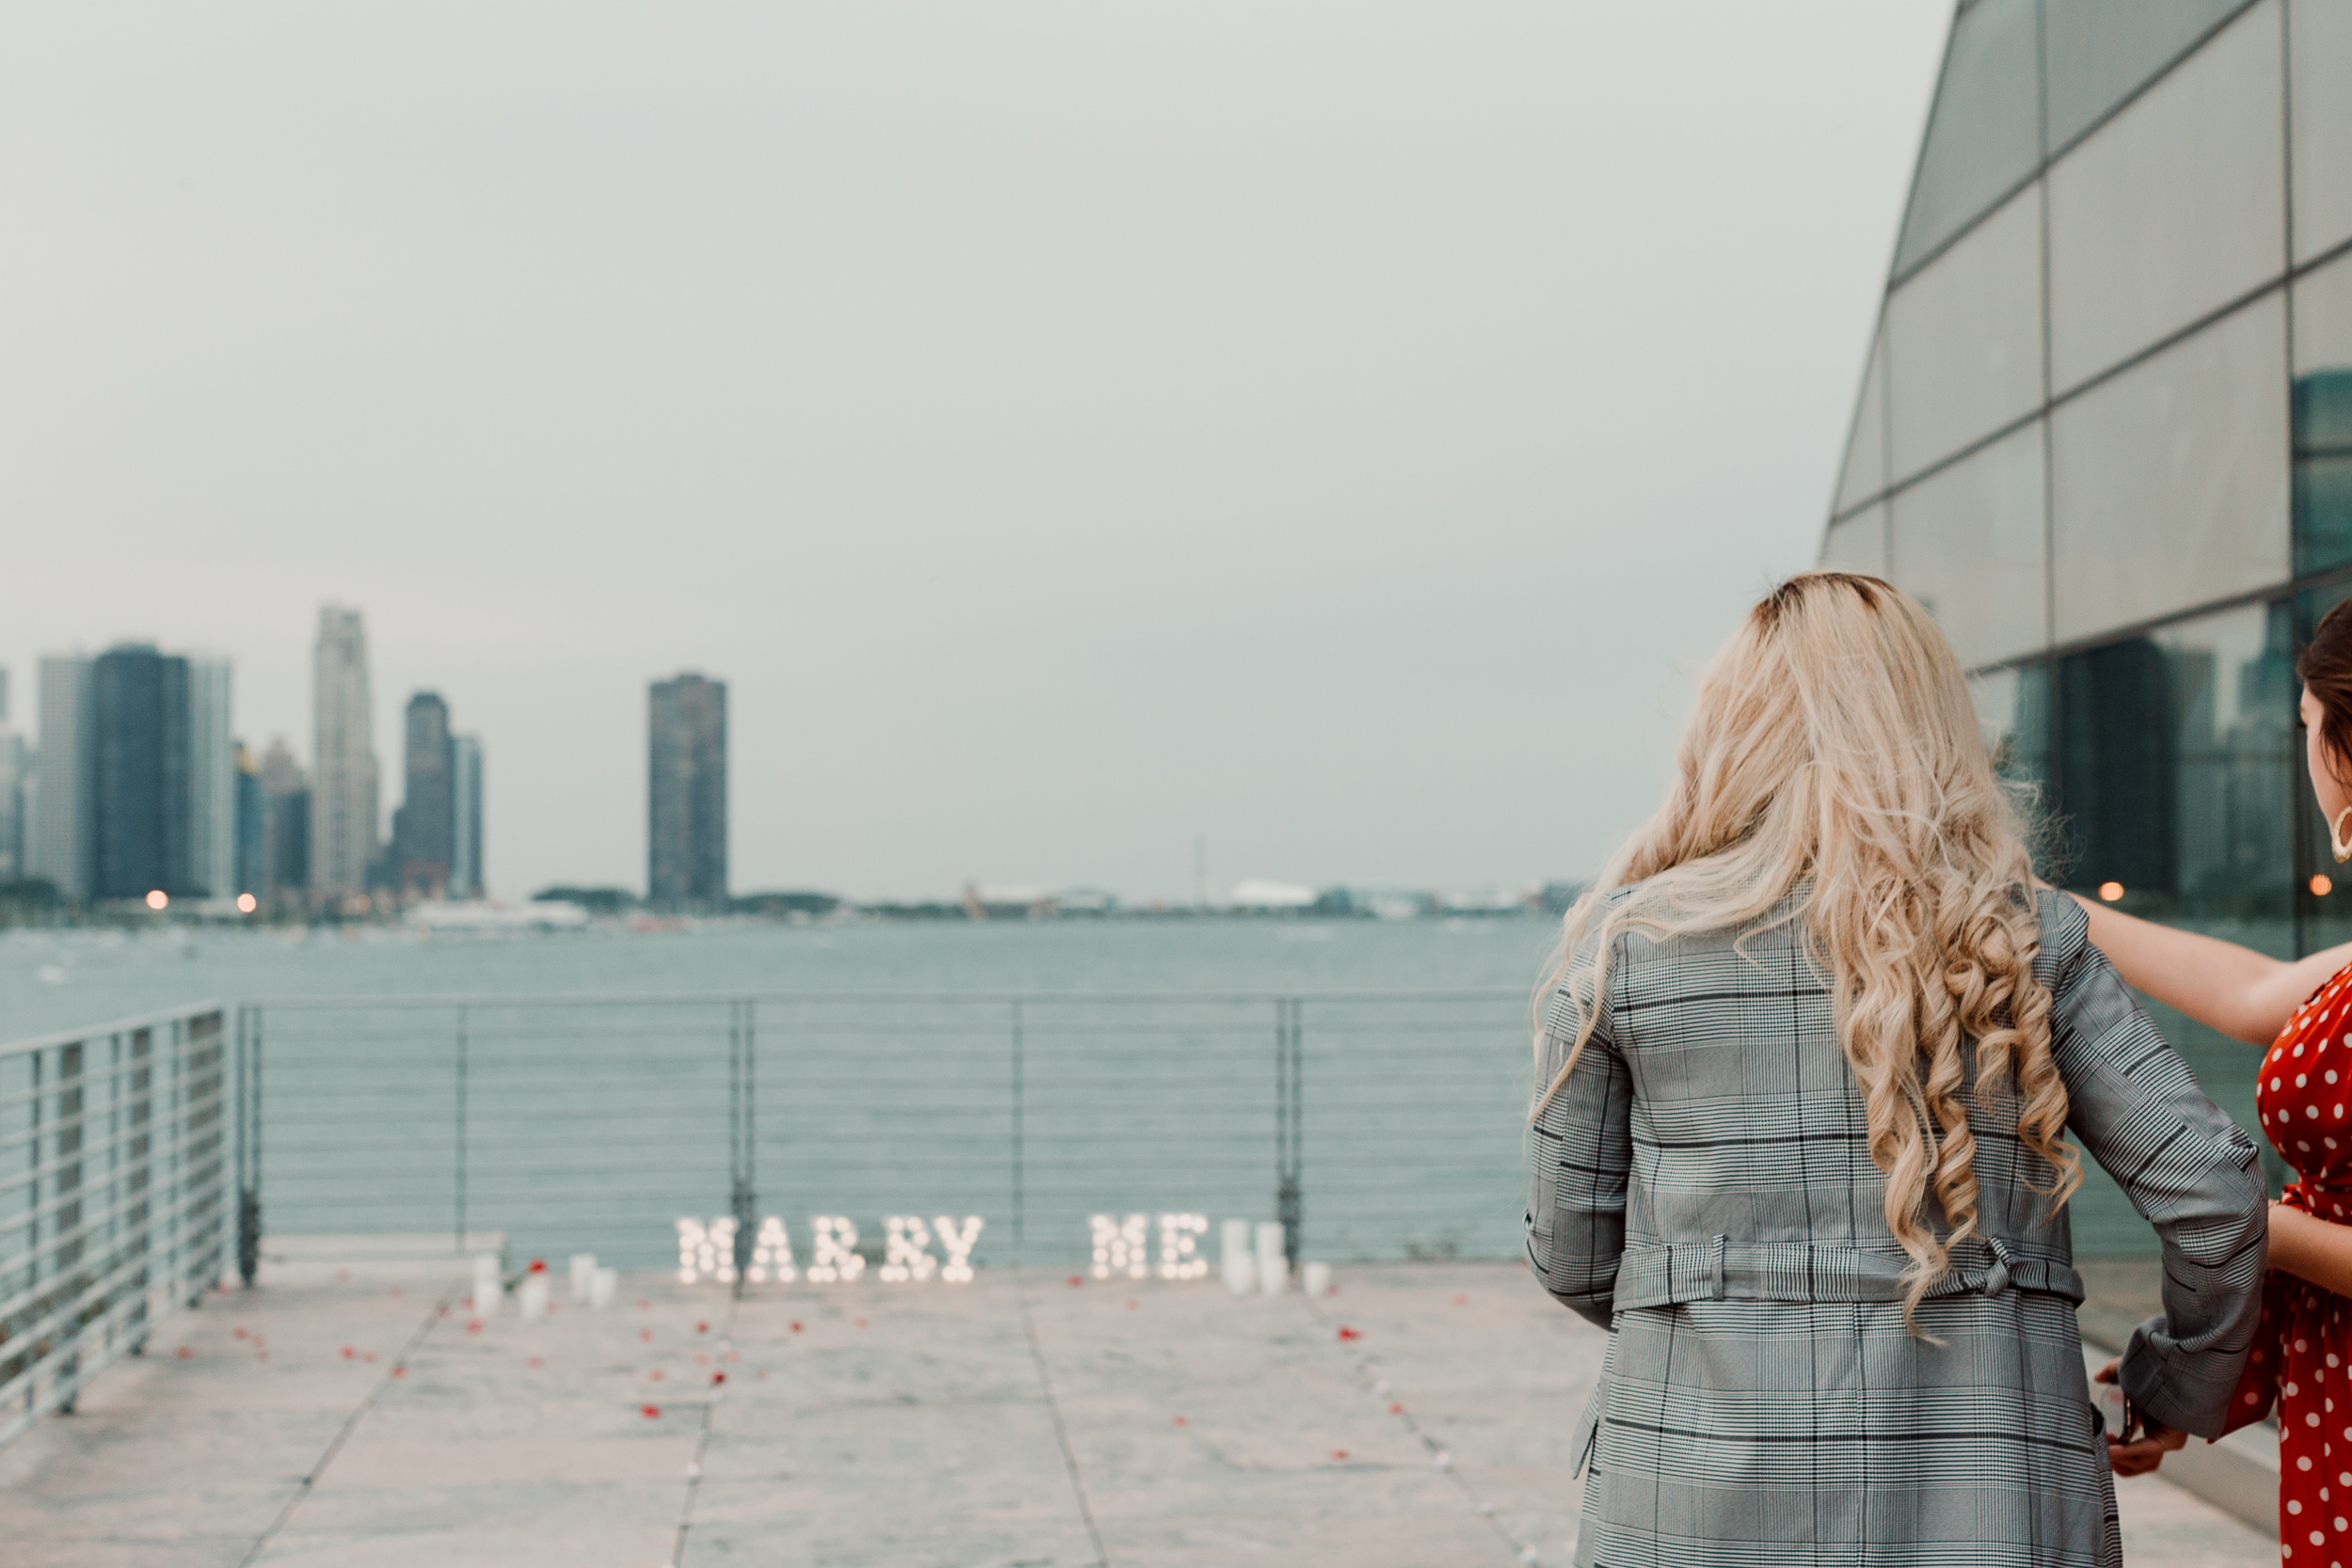 Marry Me Light up sign for a Chicago Skyline Proposal | Proposal Ideas | Chicago Engagement Photographer | Chicago Proposal Photographer | Chicago Proposal | Proposal Stories | How to Propose | She Said Yes | Engaged | Places to Get Engaged in Chicago